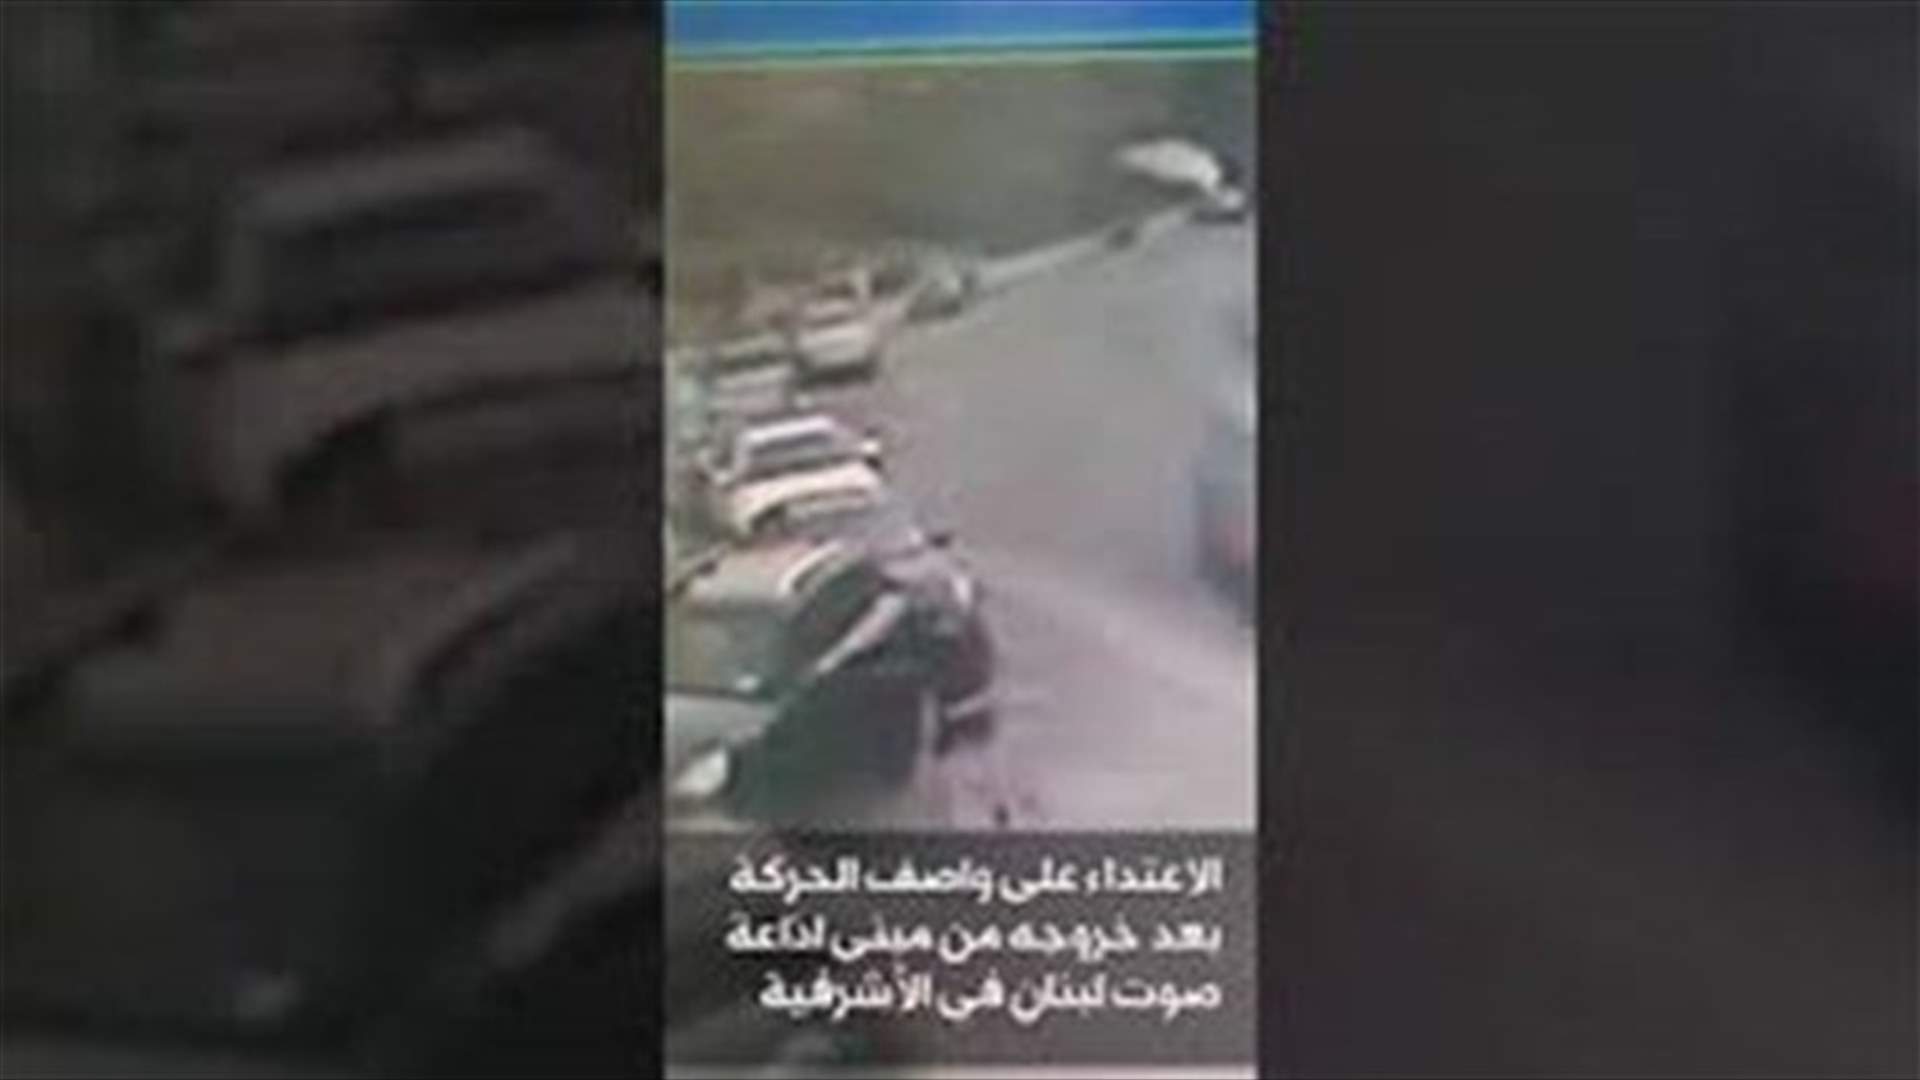 Video shows moment of attack on activist Wasef Harakeh-[VIDEO]